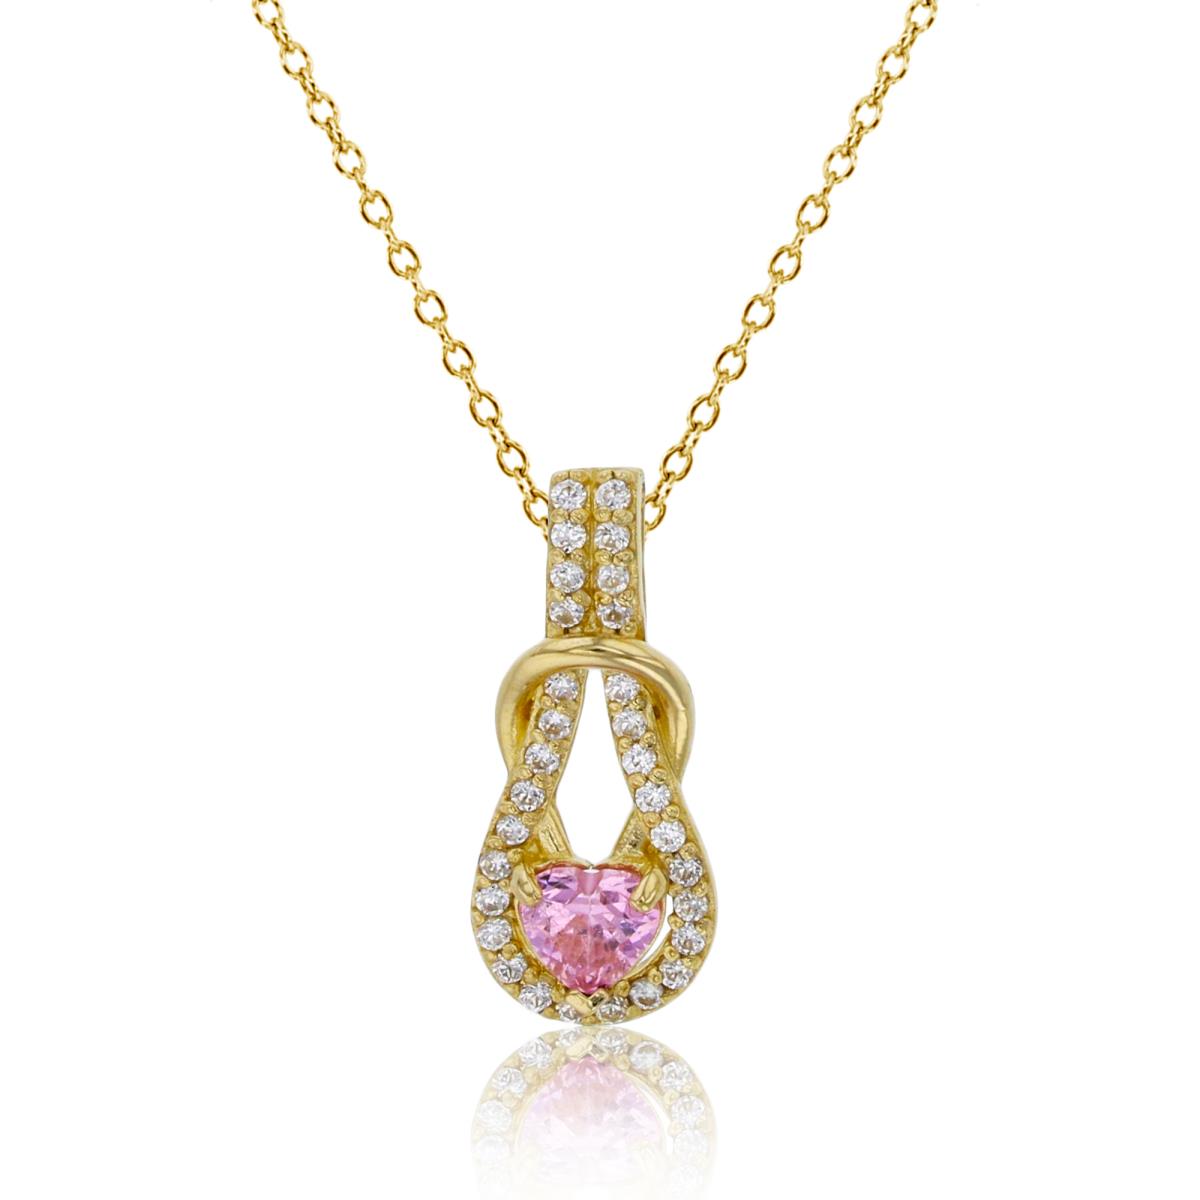 10K Yellow Gold 4mm Pink Heart Cut & White CZ Elongated Knot 18" Necklace